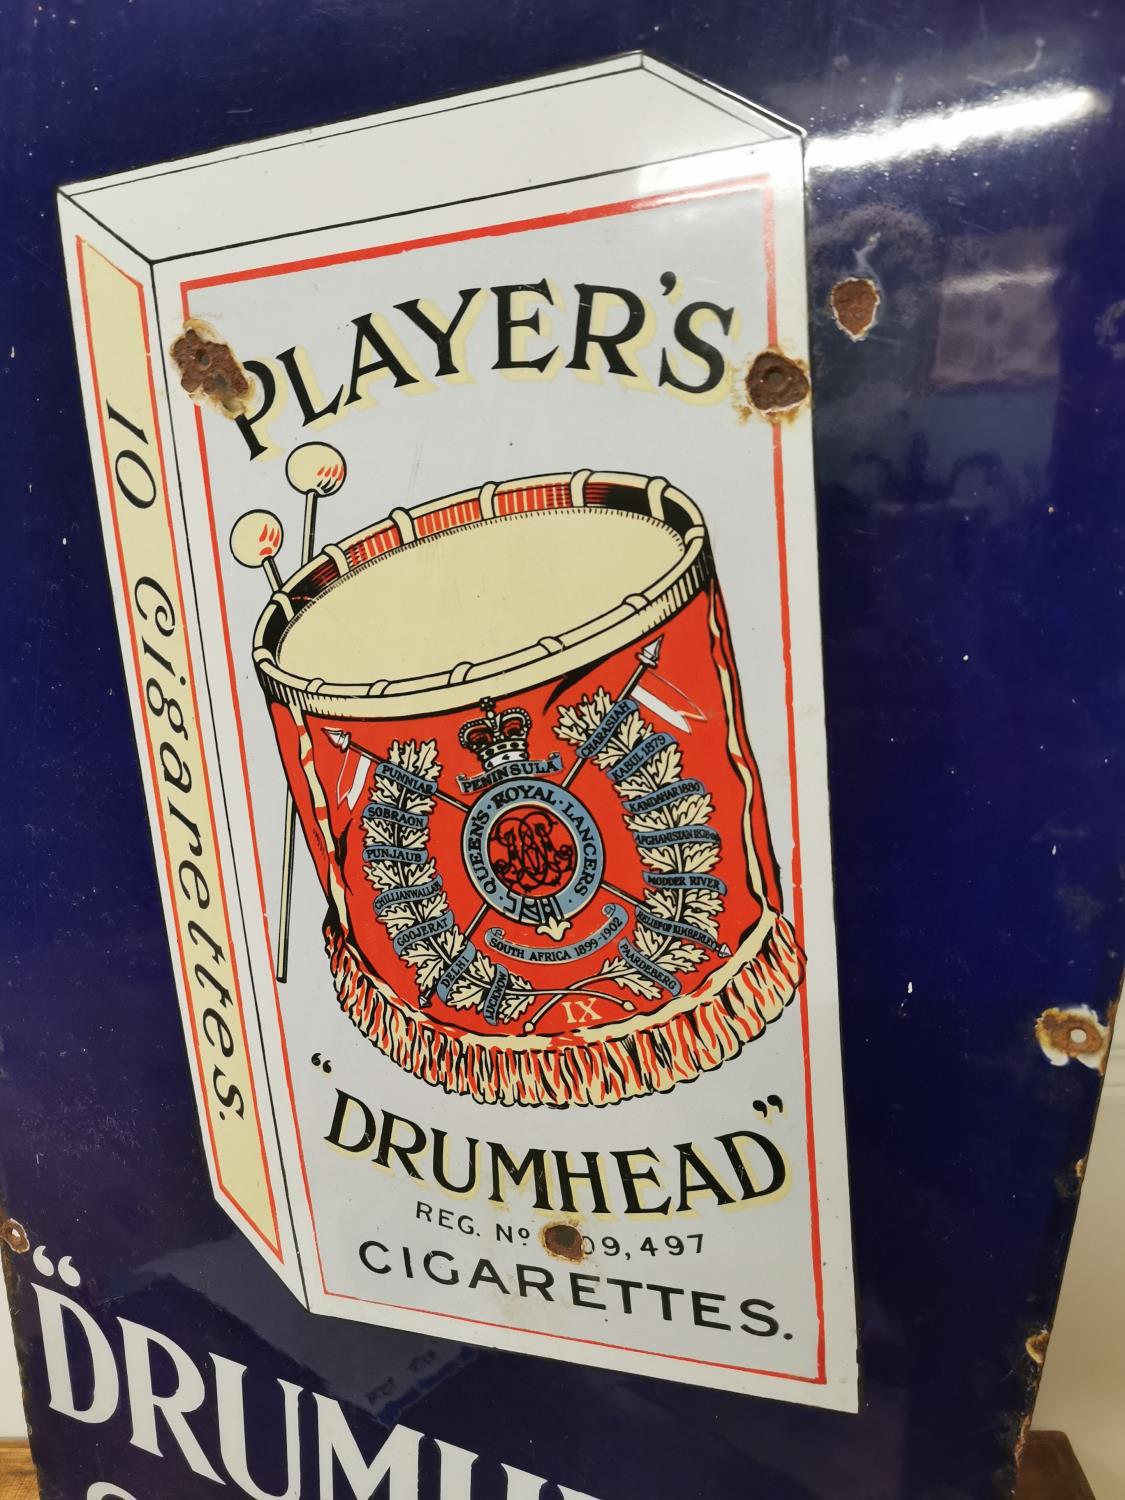 Players Drumhead Cigarettes pictorial enamel advertising sign. - Image 5 of 5